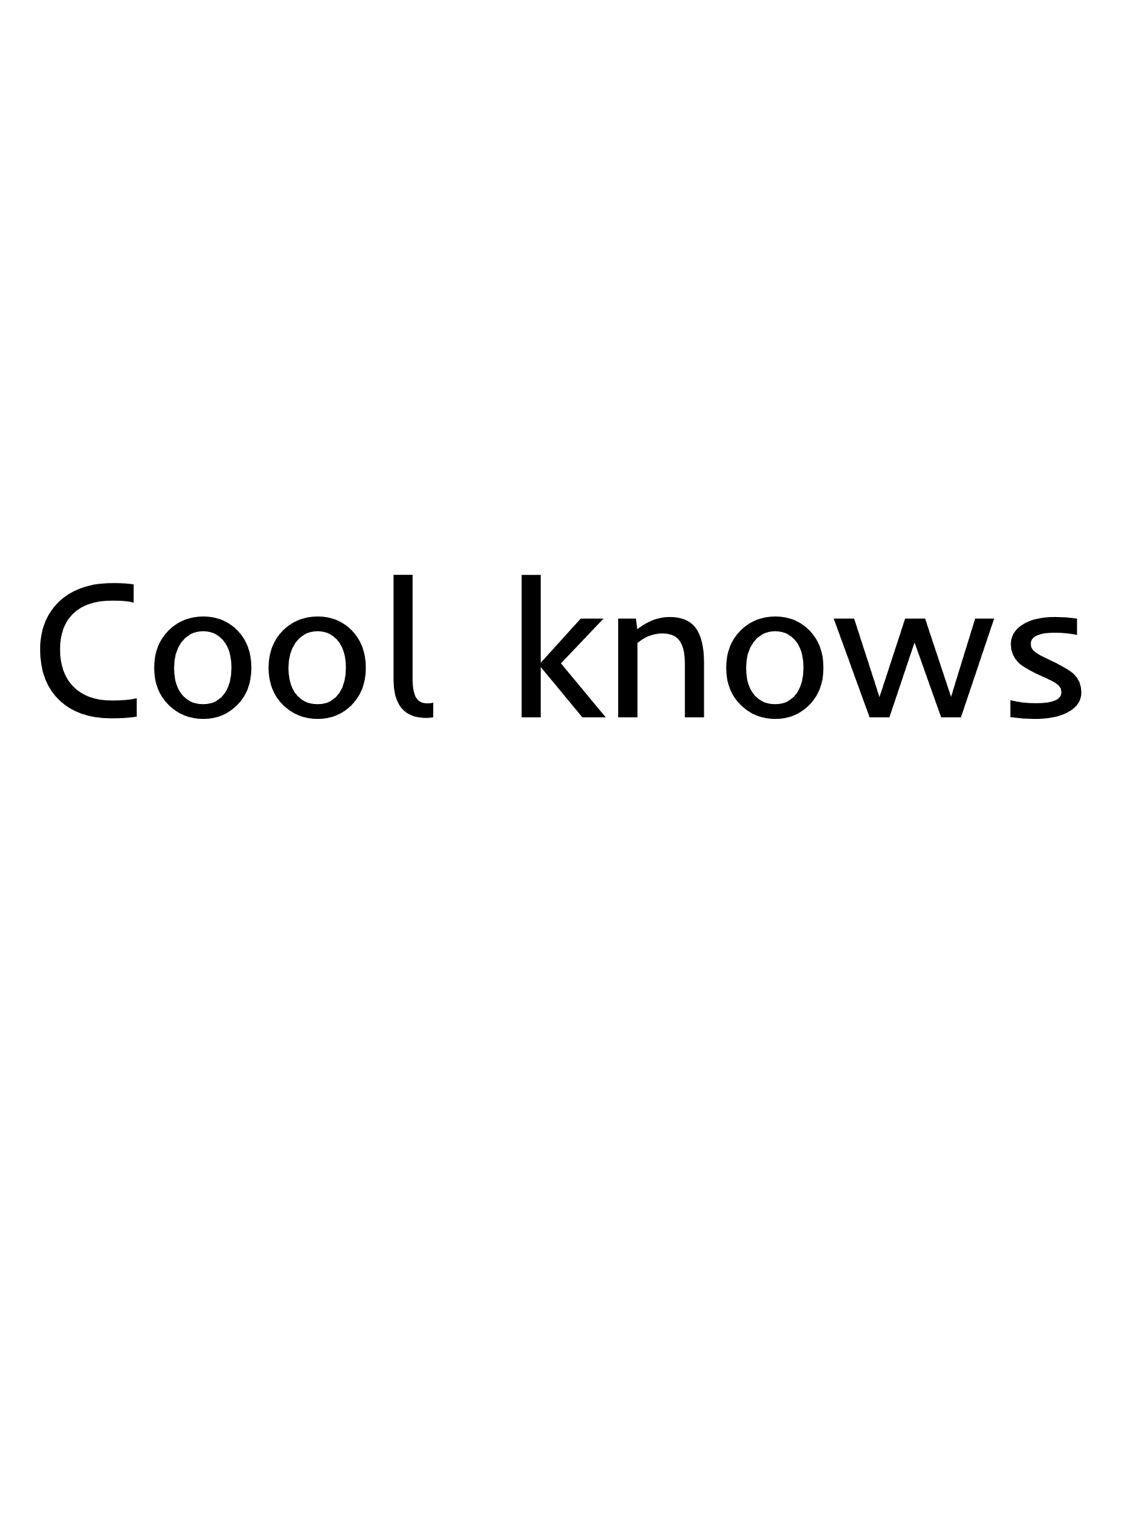 COOL KNOWS